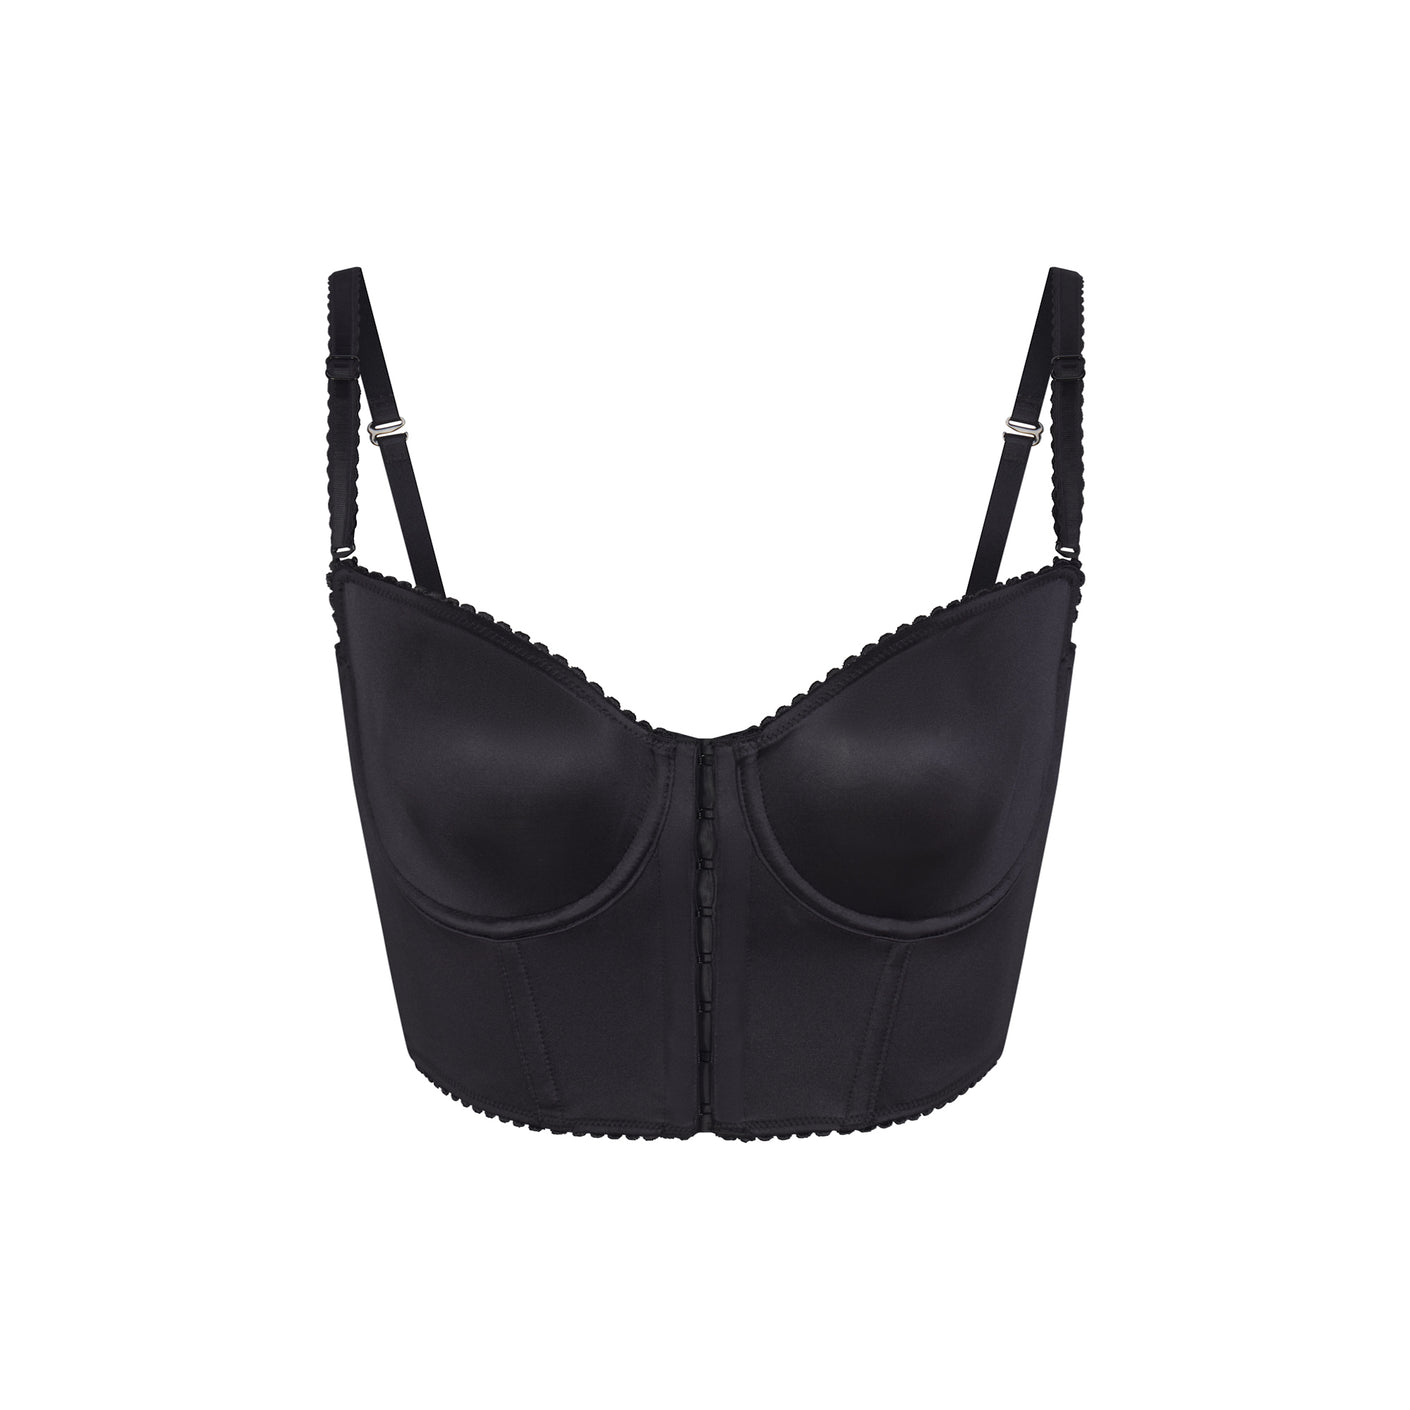 Track Skims Lace Unlined Balconette Corset - Onyx - M at Skims